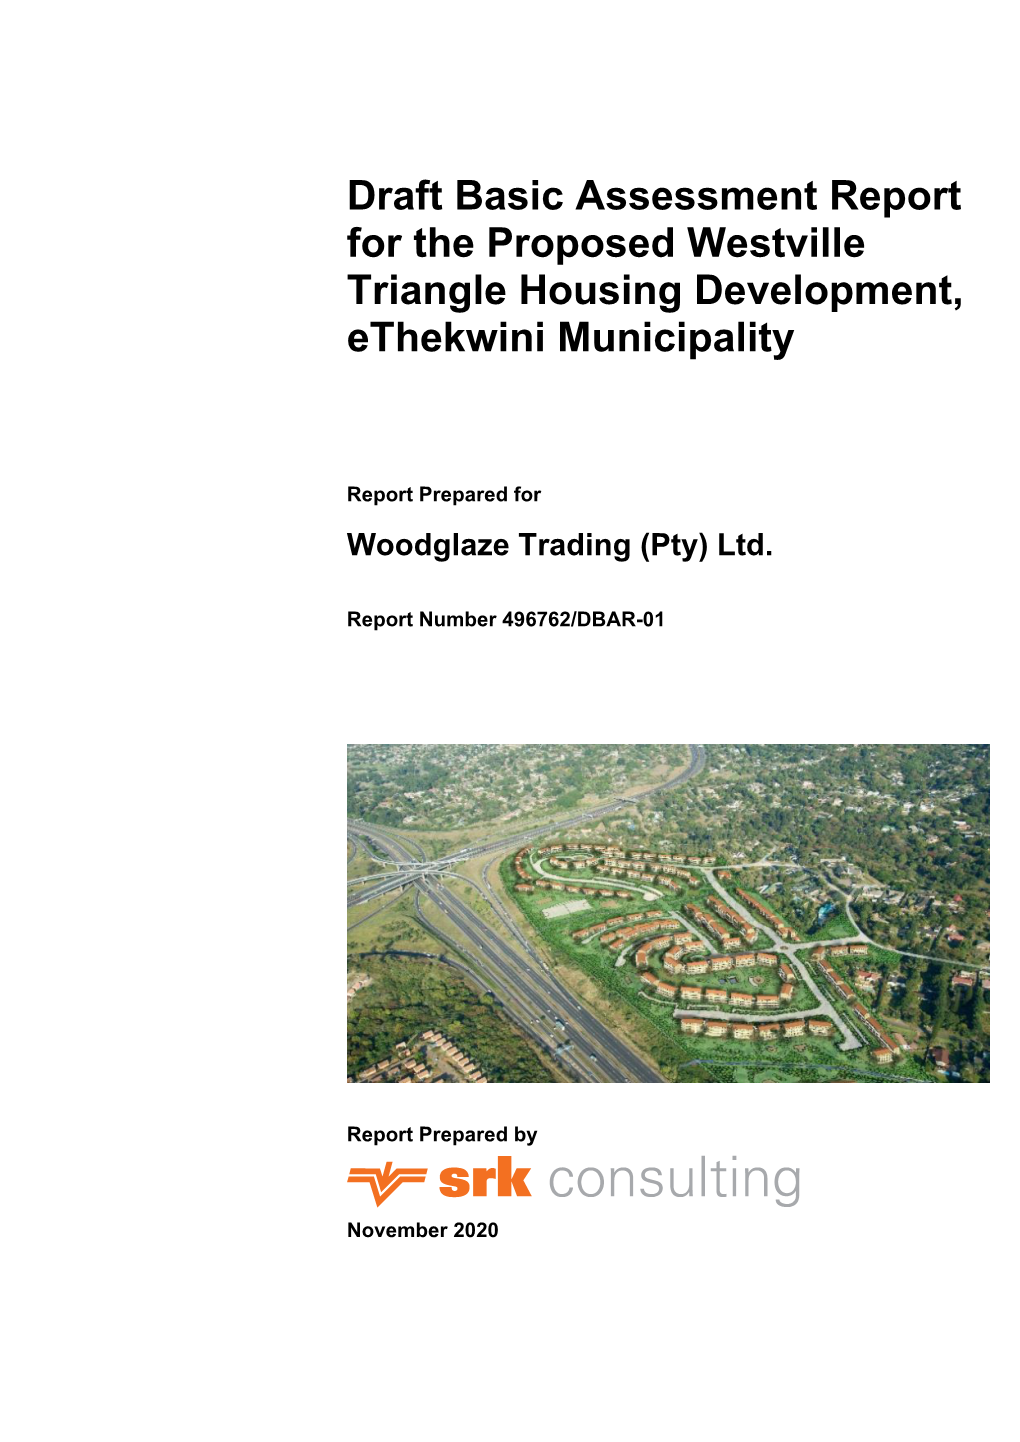 Draft Basic Assessment Report for the Proposed Westville Triangle Housing Development, Ethekwini Municipality